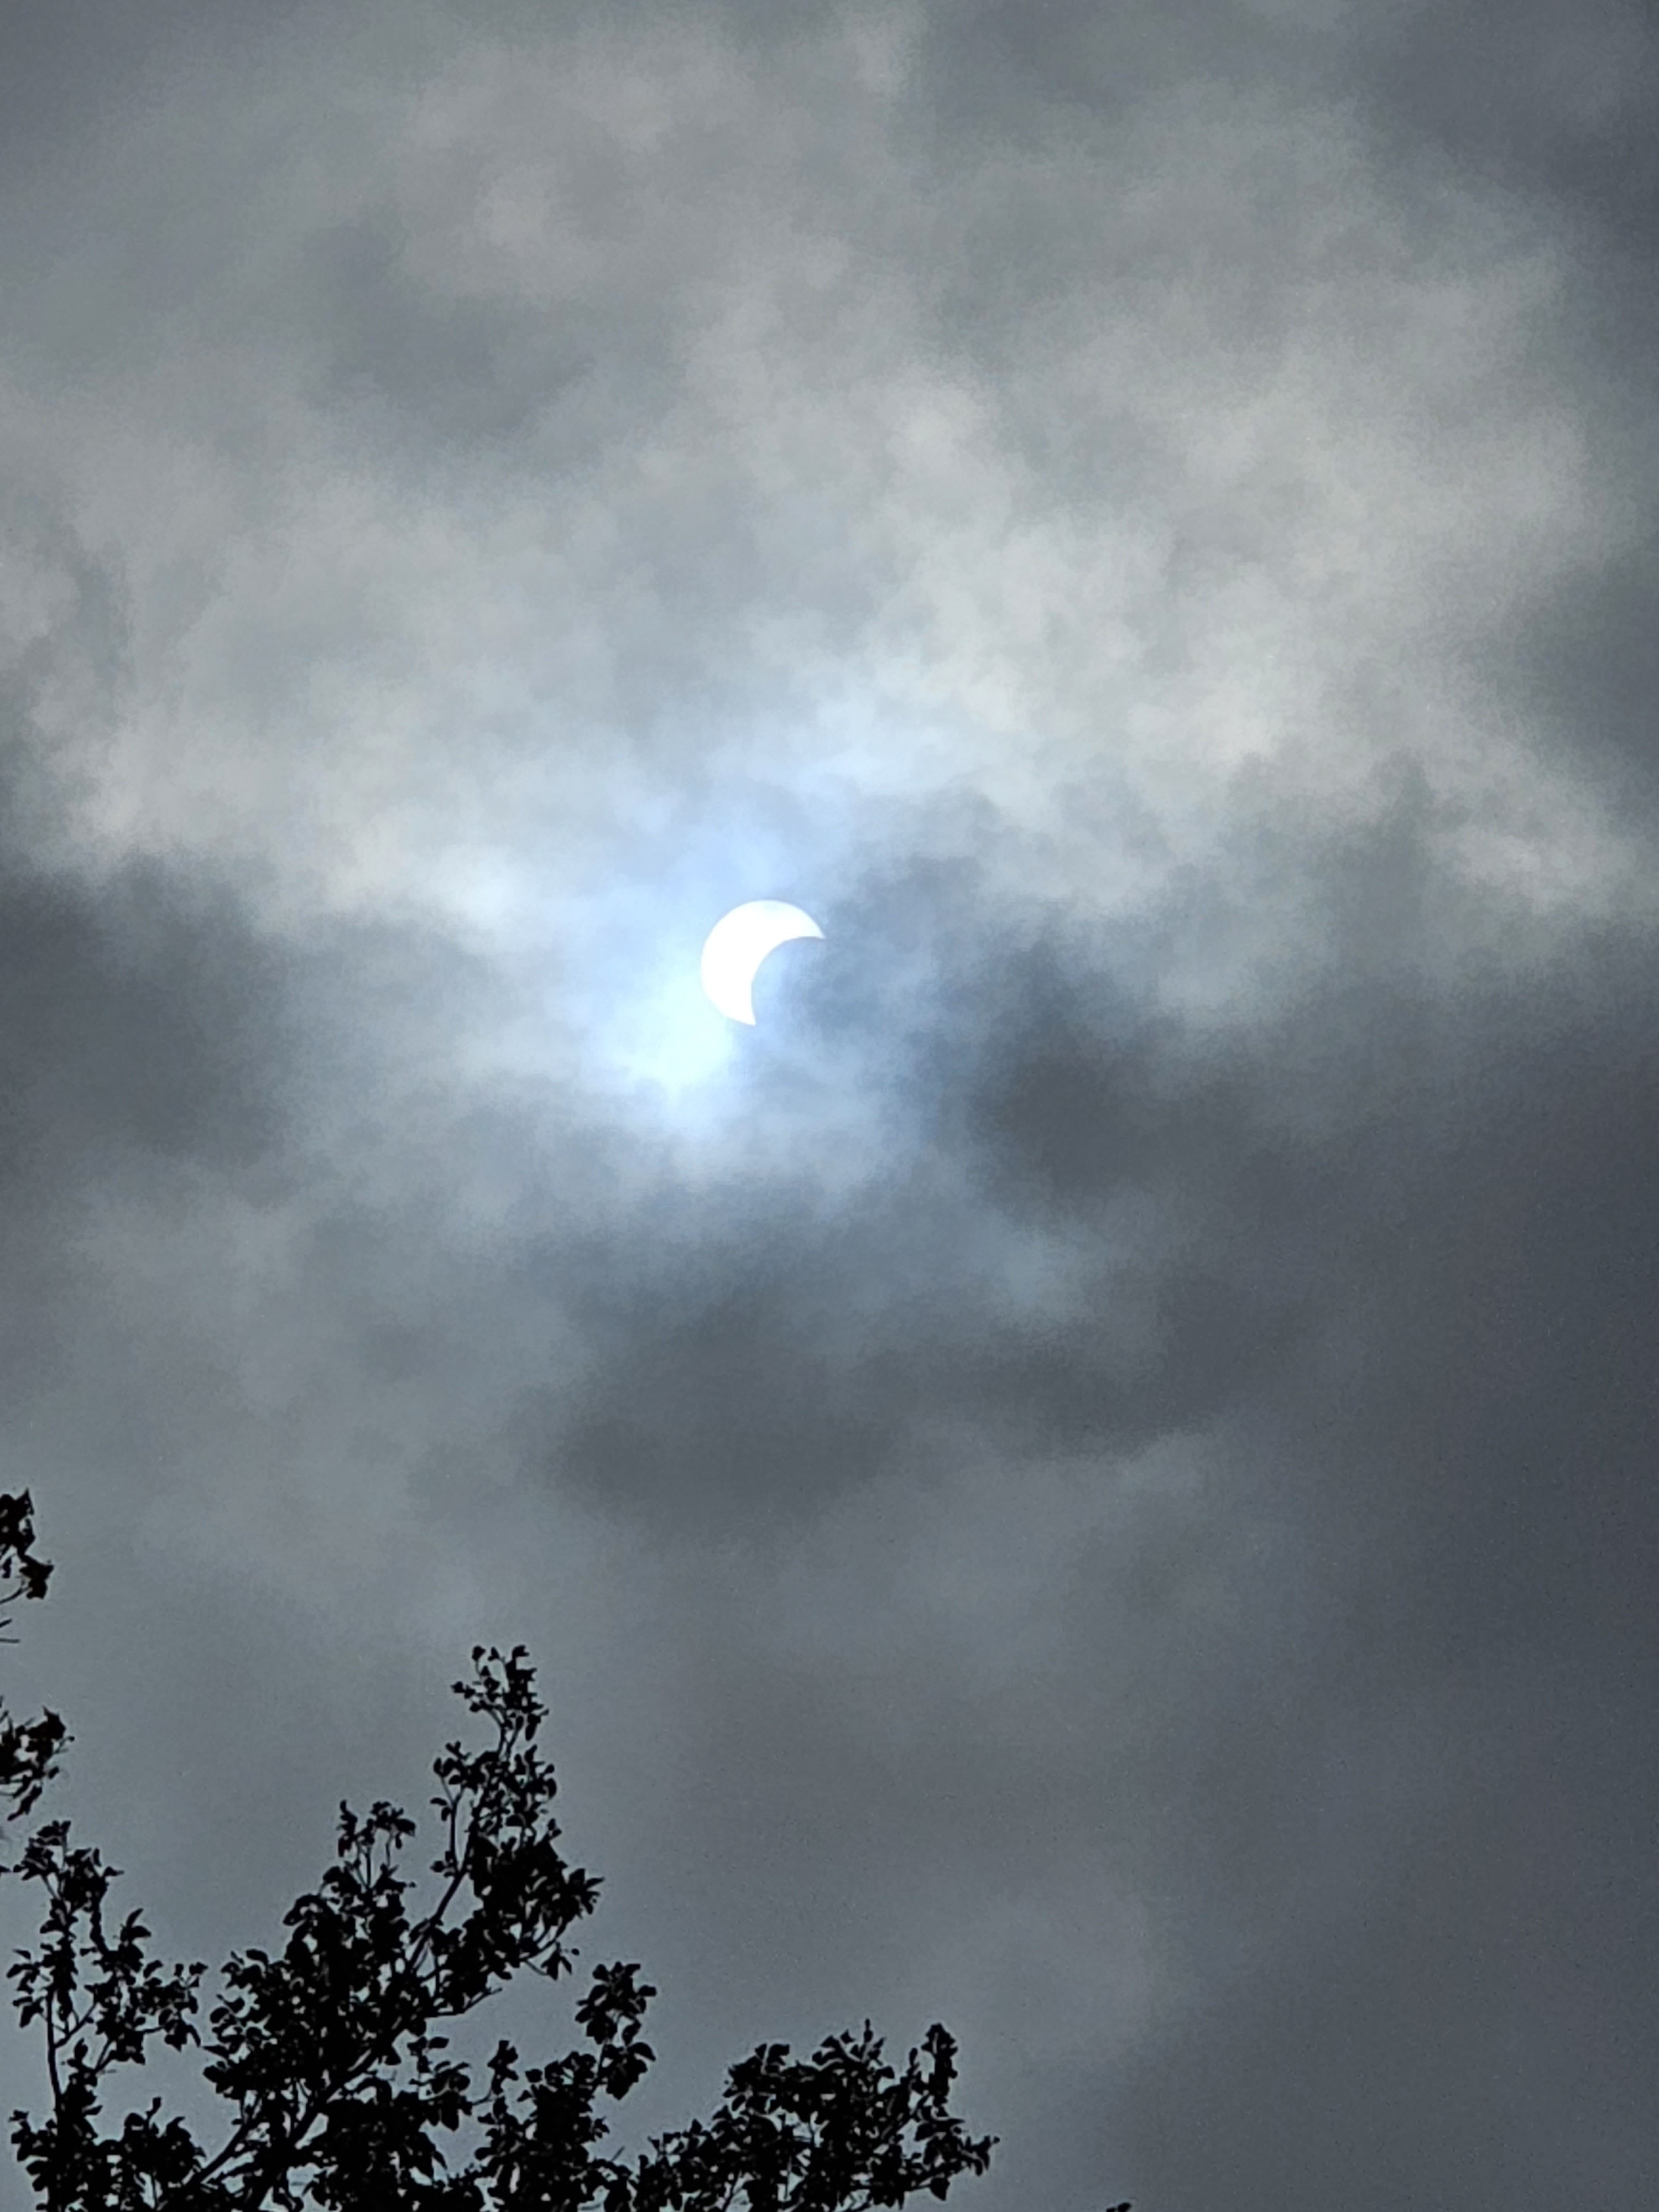 Partial Eclipse Through the Clouds